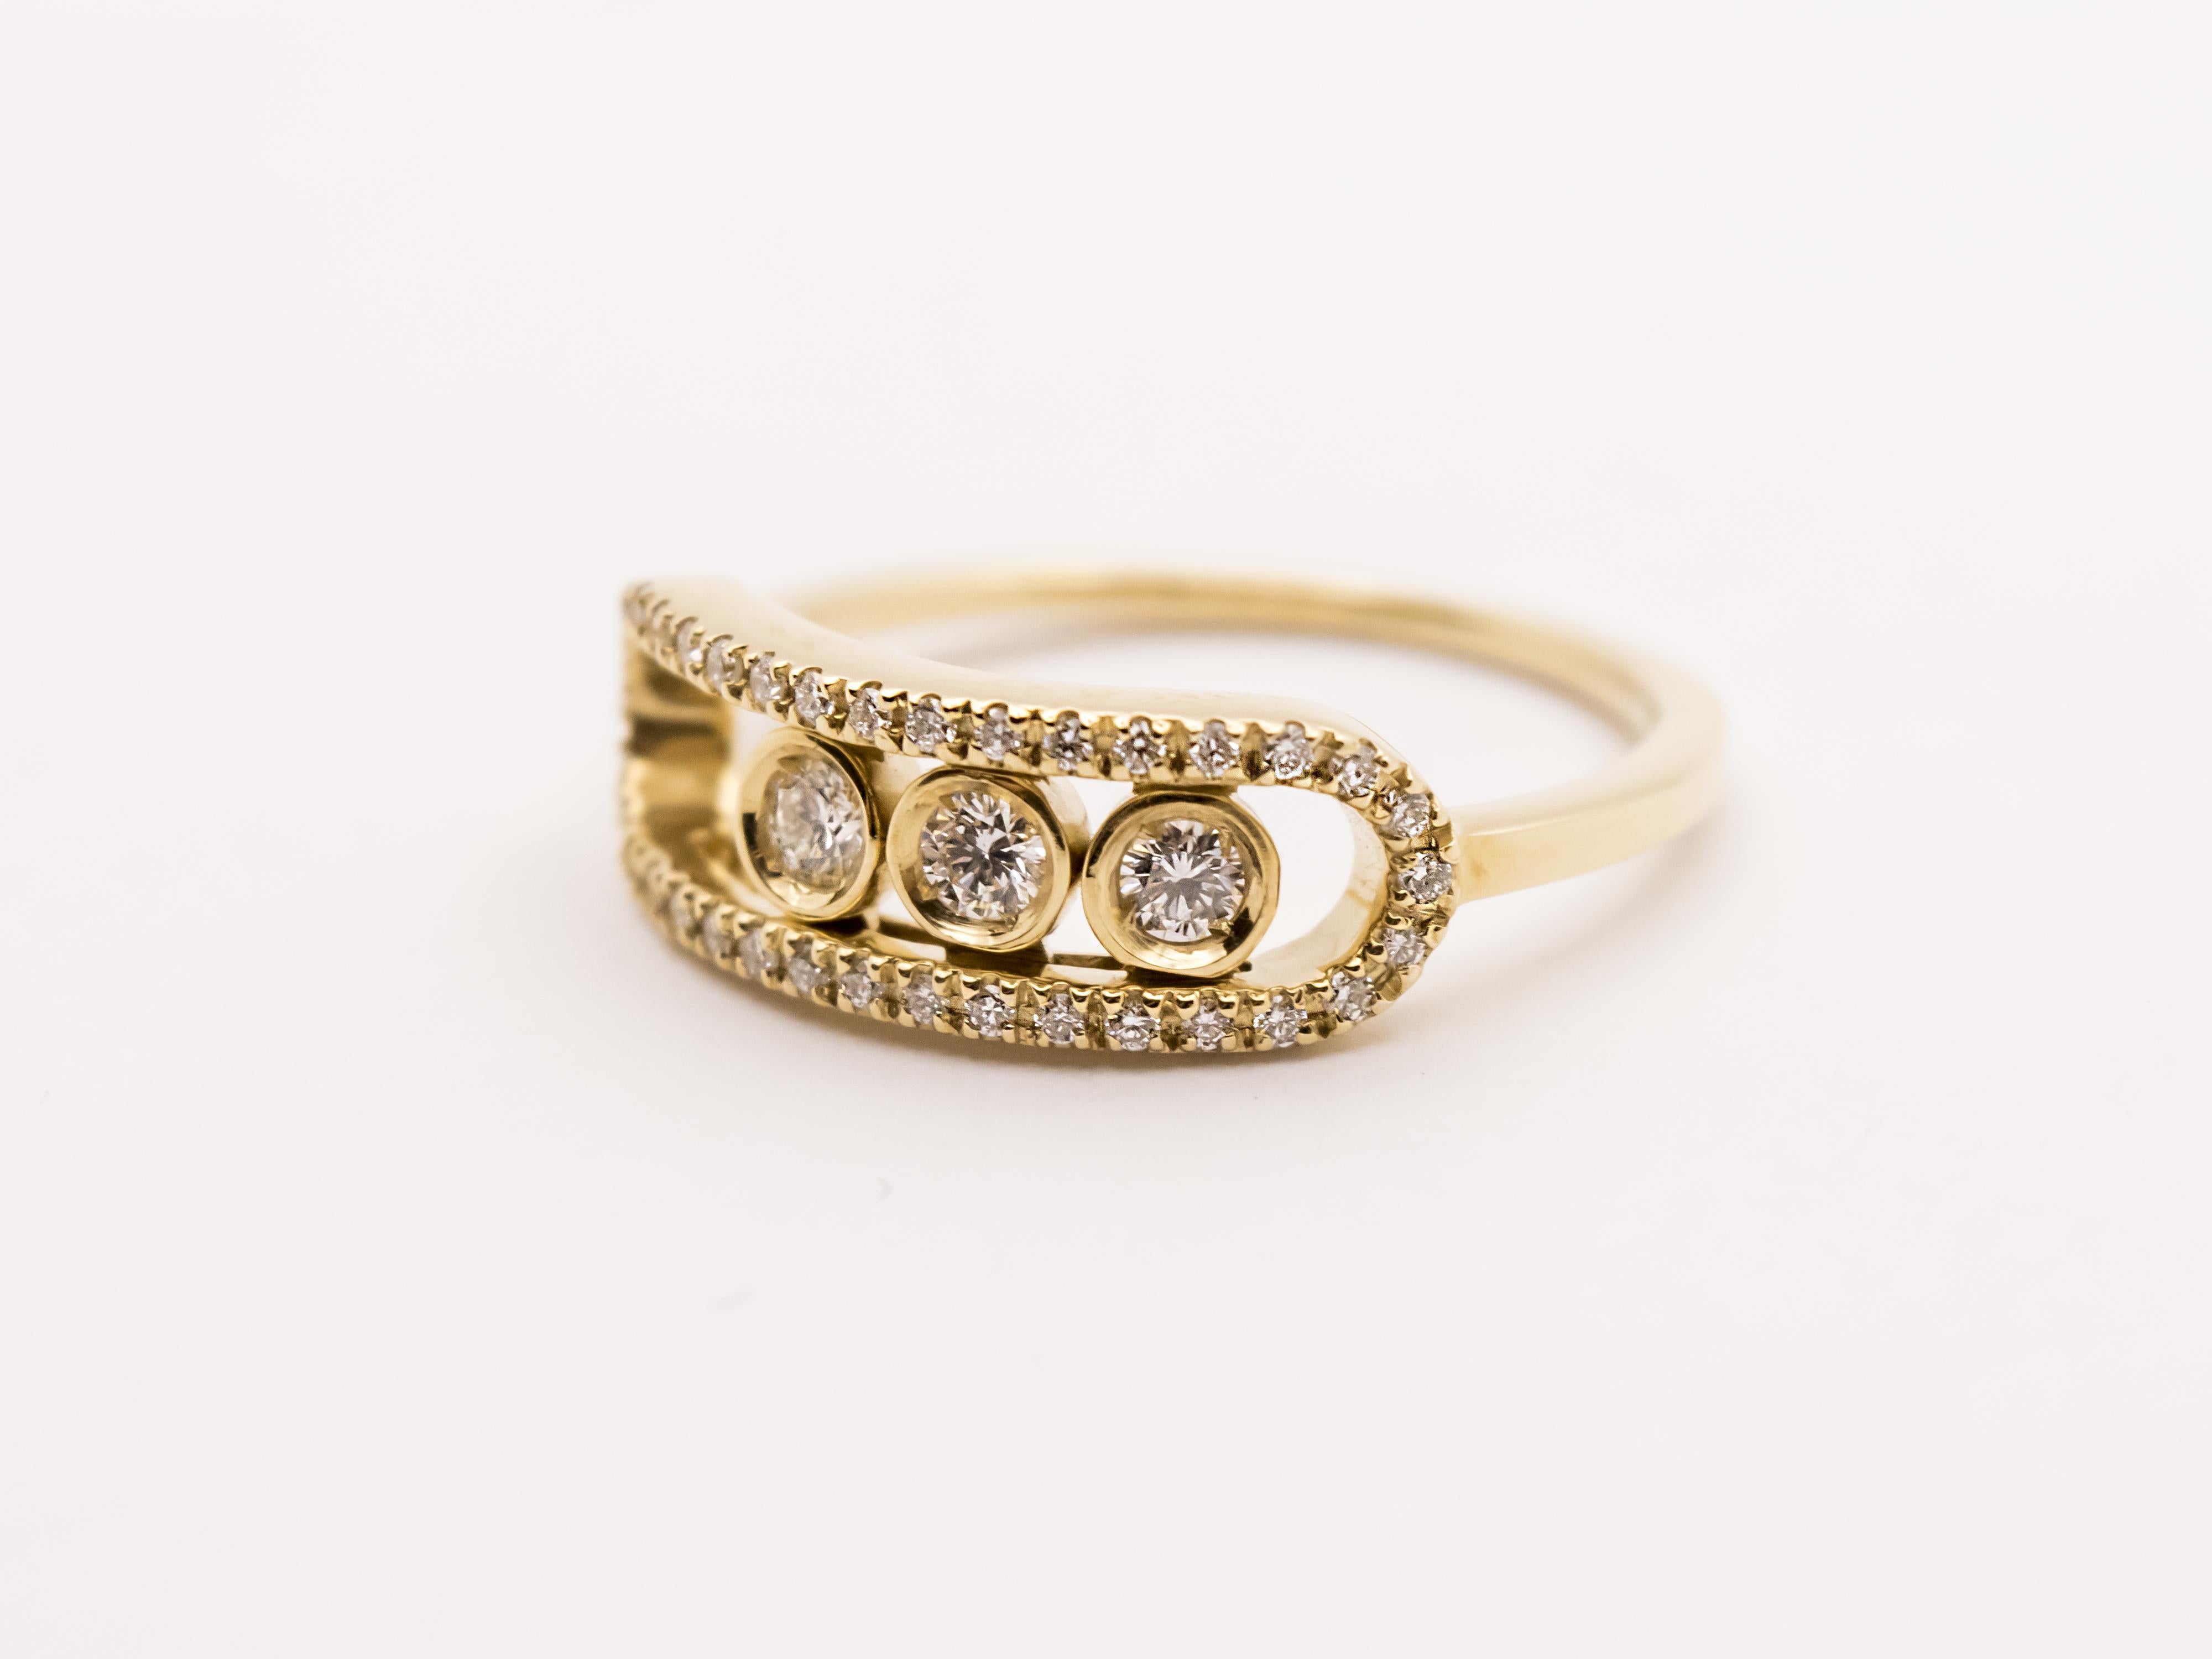 This is an Italian hand-made 18Kt yellow gold ring.
It has a oval frame at the center enhanced by precious diamonds.

Throughout the frame there are three bigger diamonds fitted on three different round moving settings.
Thanks to its fancy style